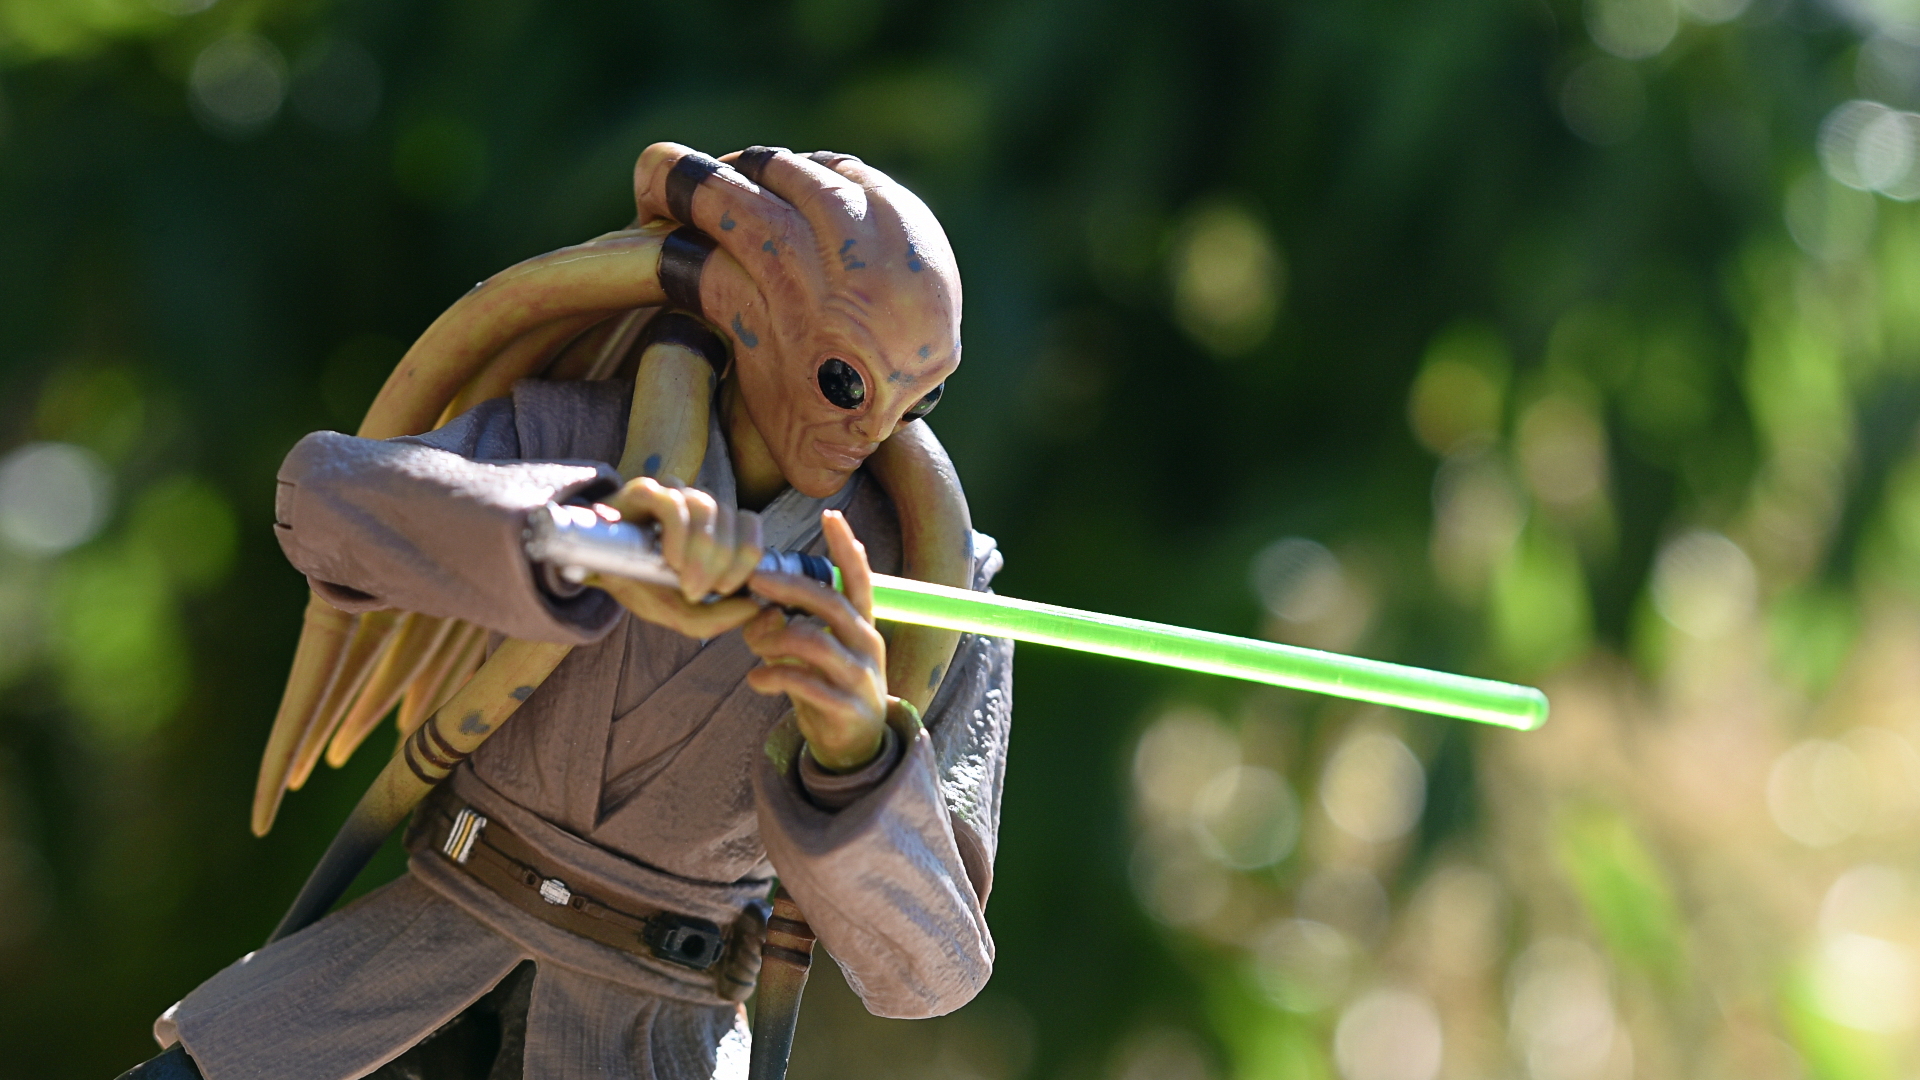 You can also upload and share your favorite Kit Fisto lightsaber desktop wa...